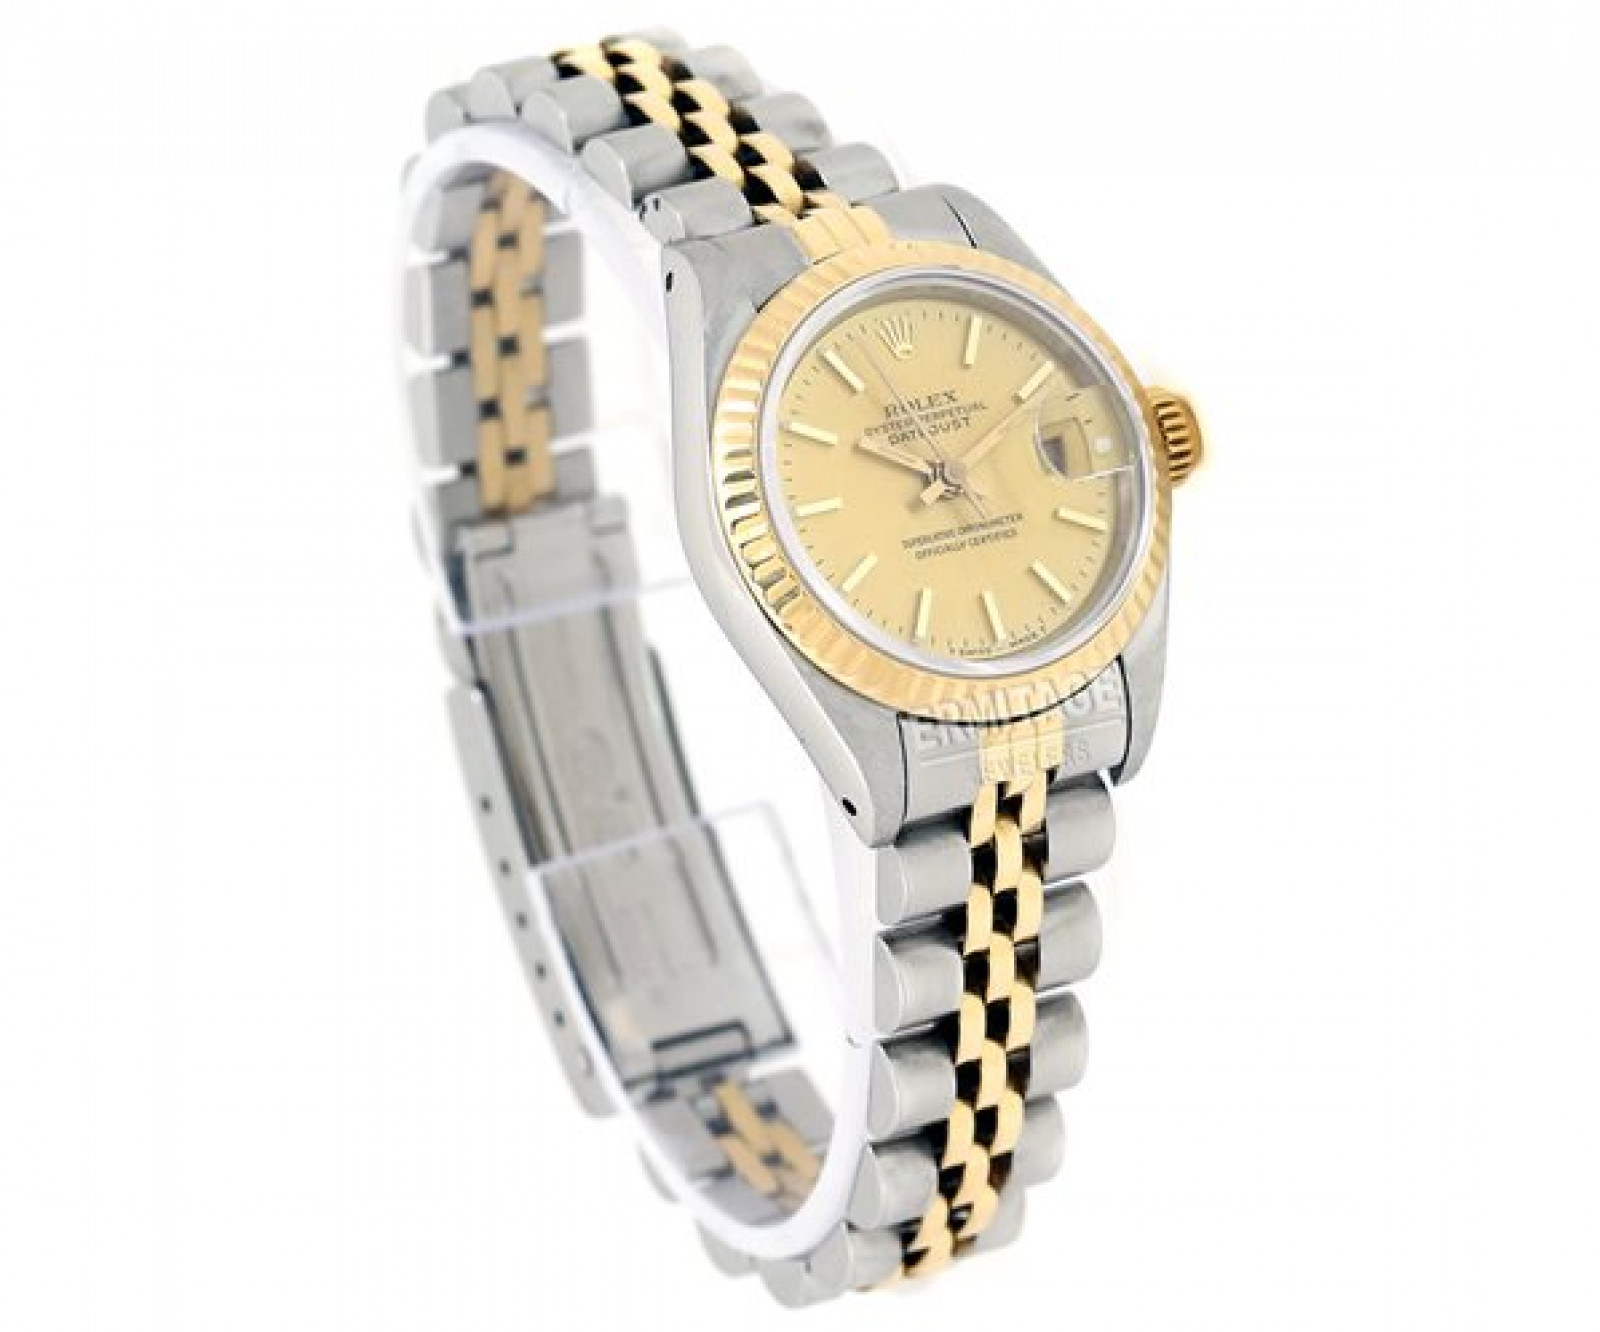 Pre-Owned Gold & Steel Rolex Datejust 69173 Year 1984